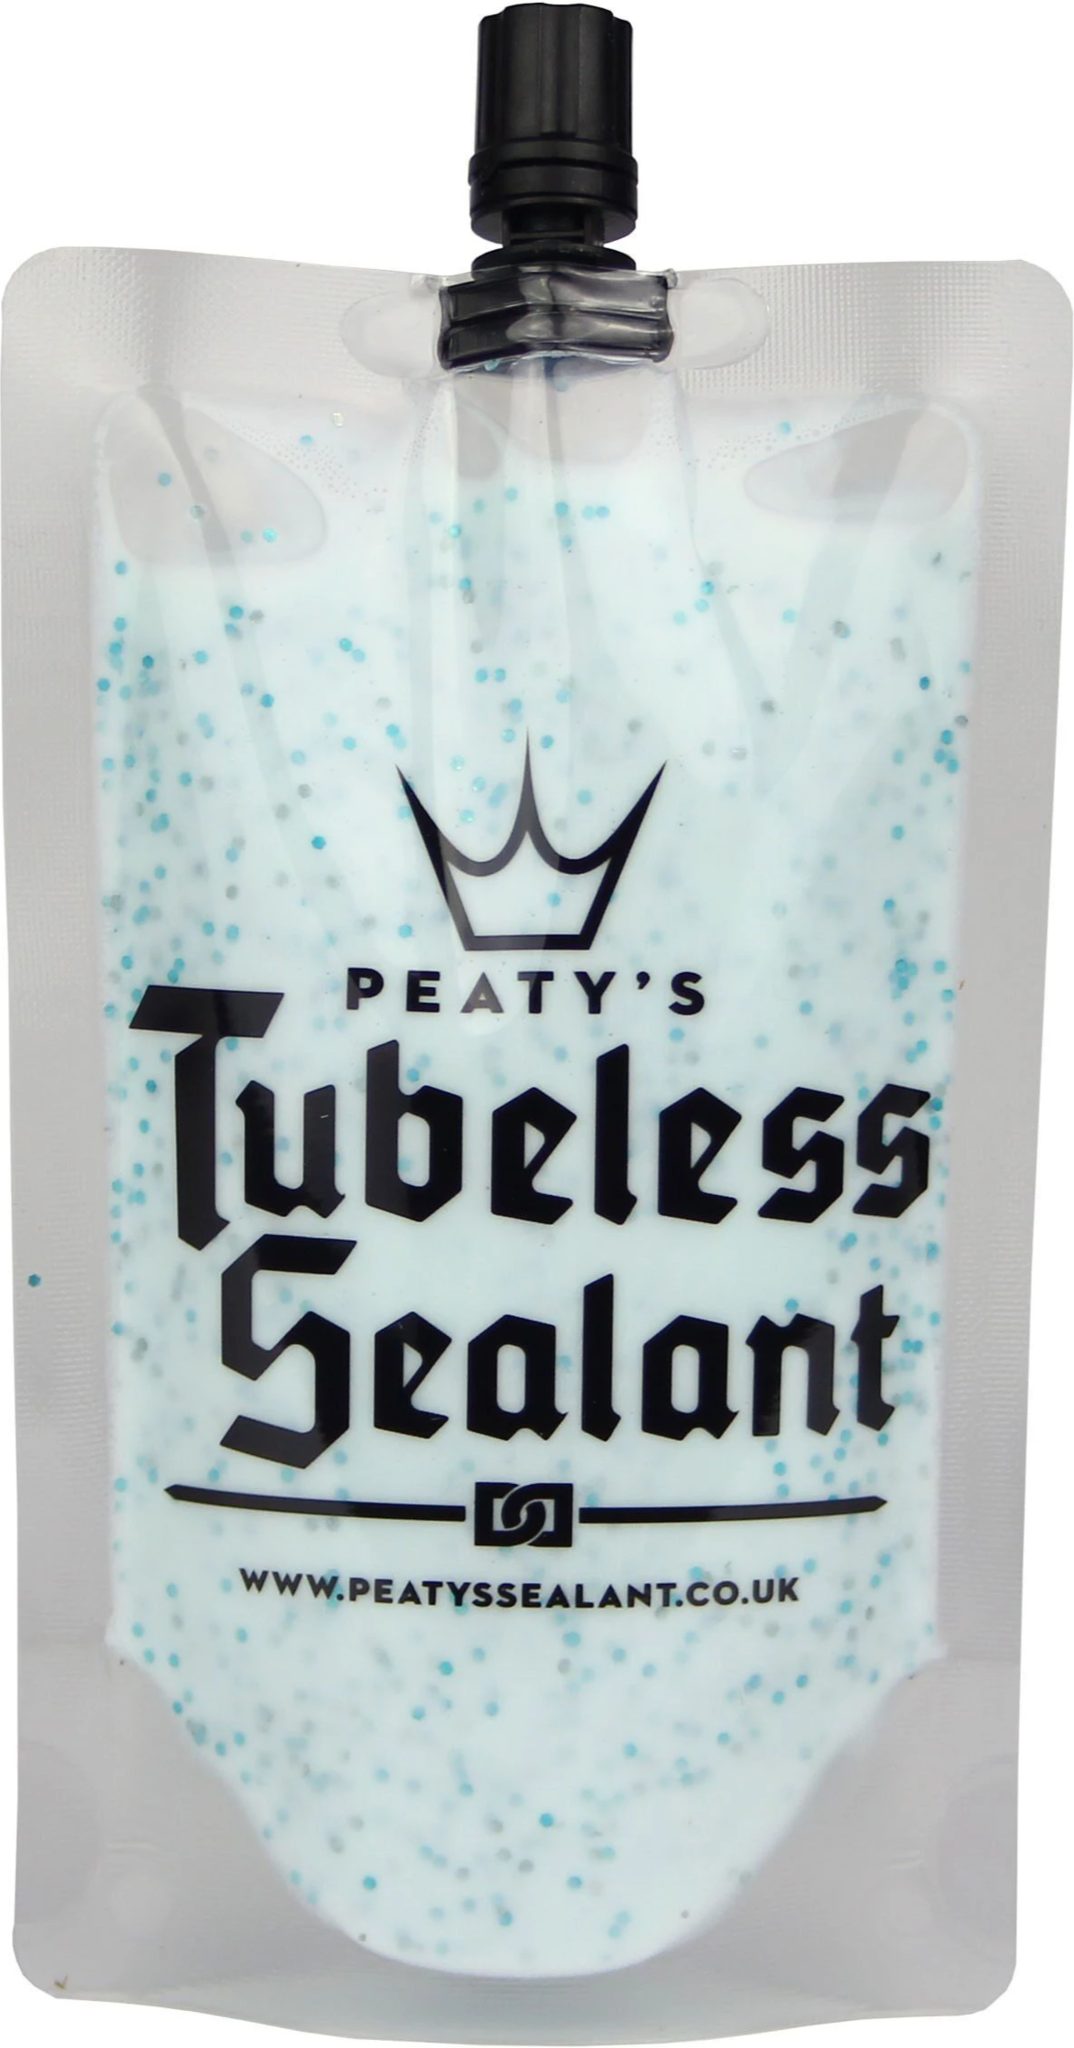 Peaty's Tubeless Sealant Trail Pouch